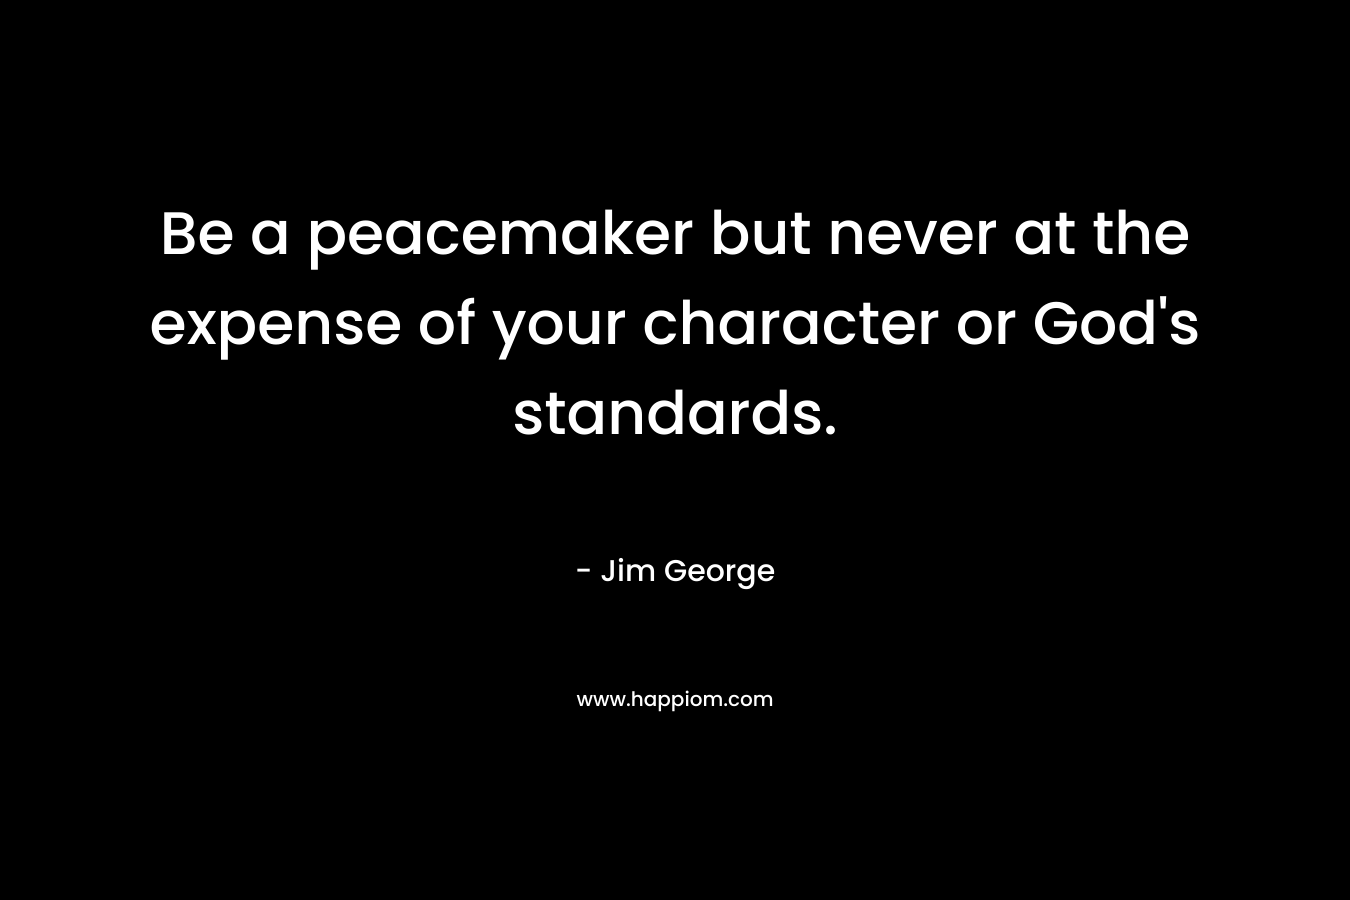 Be a peacemaker but never at the expense of your character or God's standards.